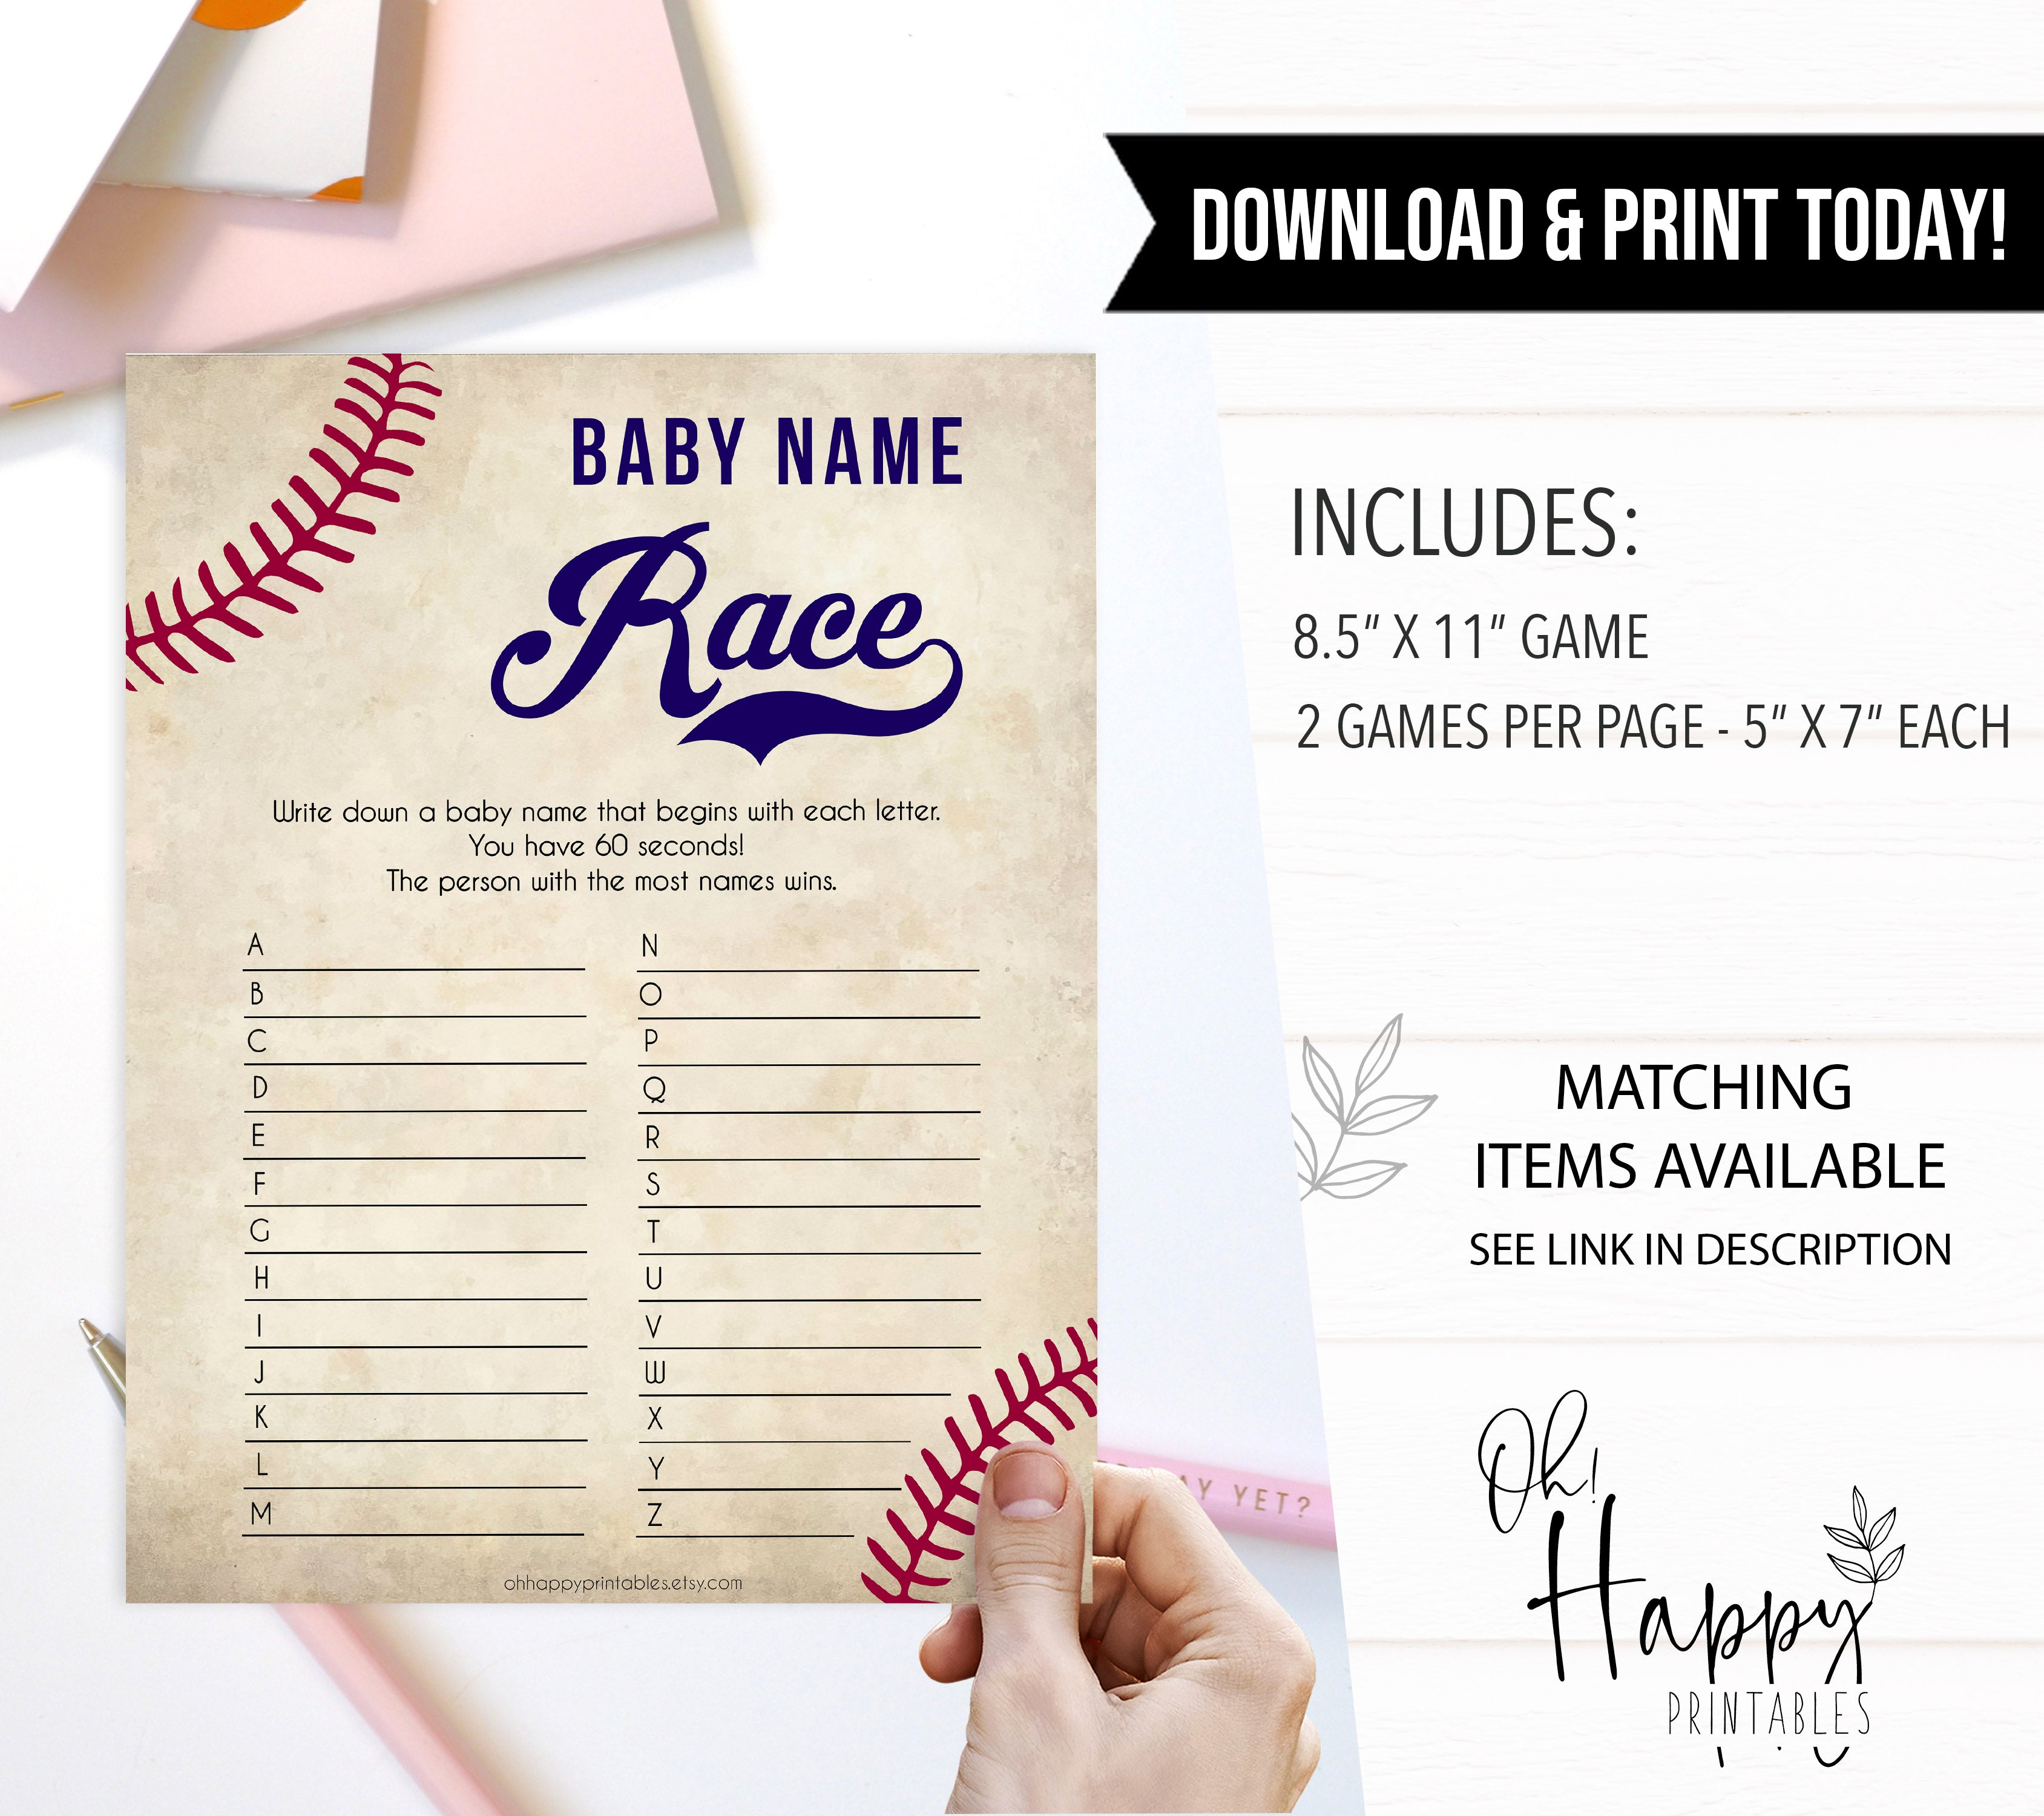 Baseball Baby Name Race Game, Baby Shower Games, Baby Names Game, Baby Names Game, Baseball Baby Shower Game, Baby Name Race Game, printable baby shower games, fun baby shower games, popular baby shower games